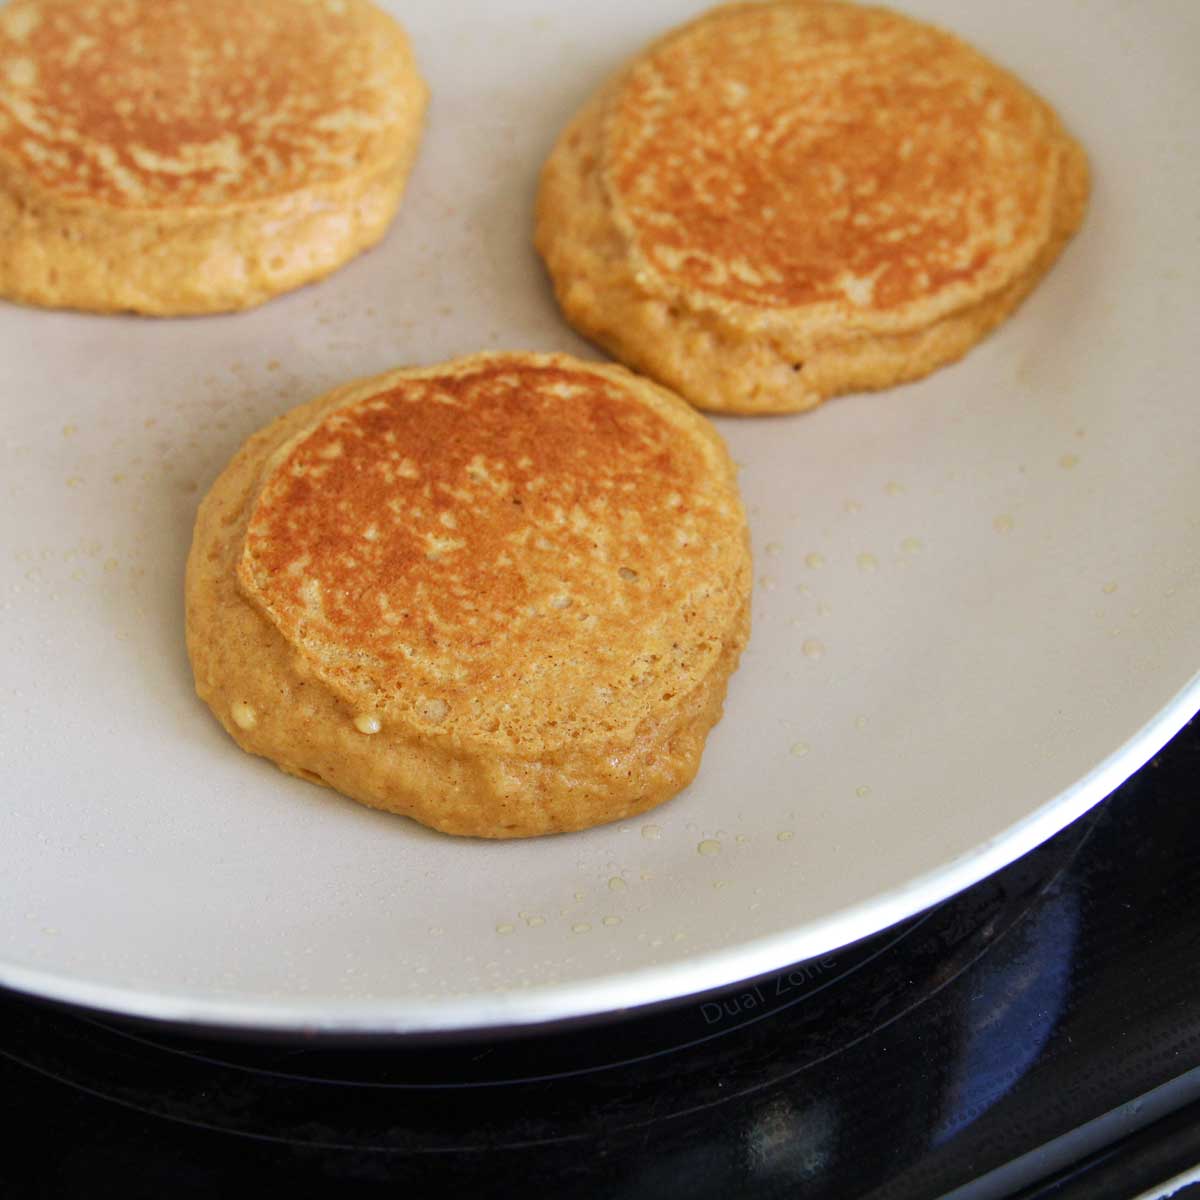 How to Make Healthy Powdered Peanut Butter Pancakes Using PB Fit or PB2 - Powdered Peanut Butter Pancakes